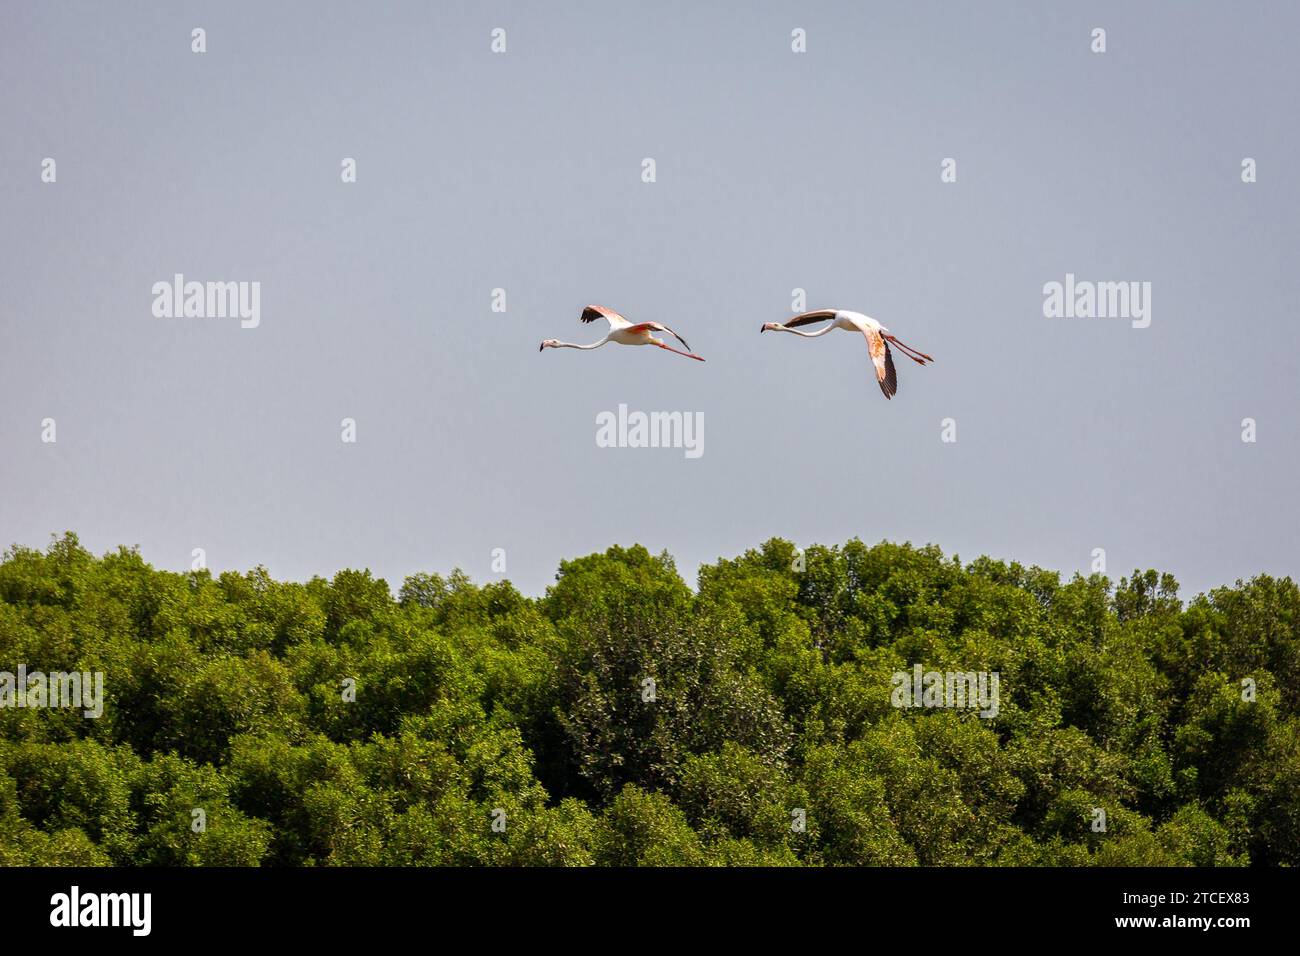 Two greater Flamingos (Phoenicopterus roseus) flying over Ras Al Khor Wildlife Sanctuary in Dubai, mangrove forest in the background. Stock Photo